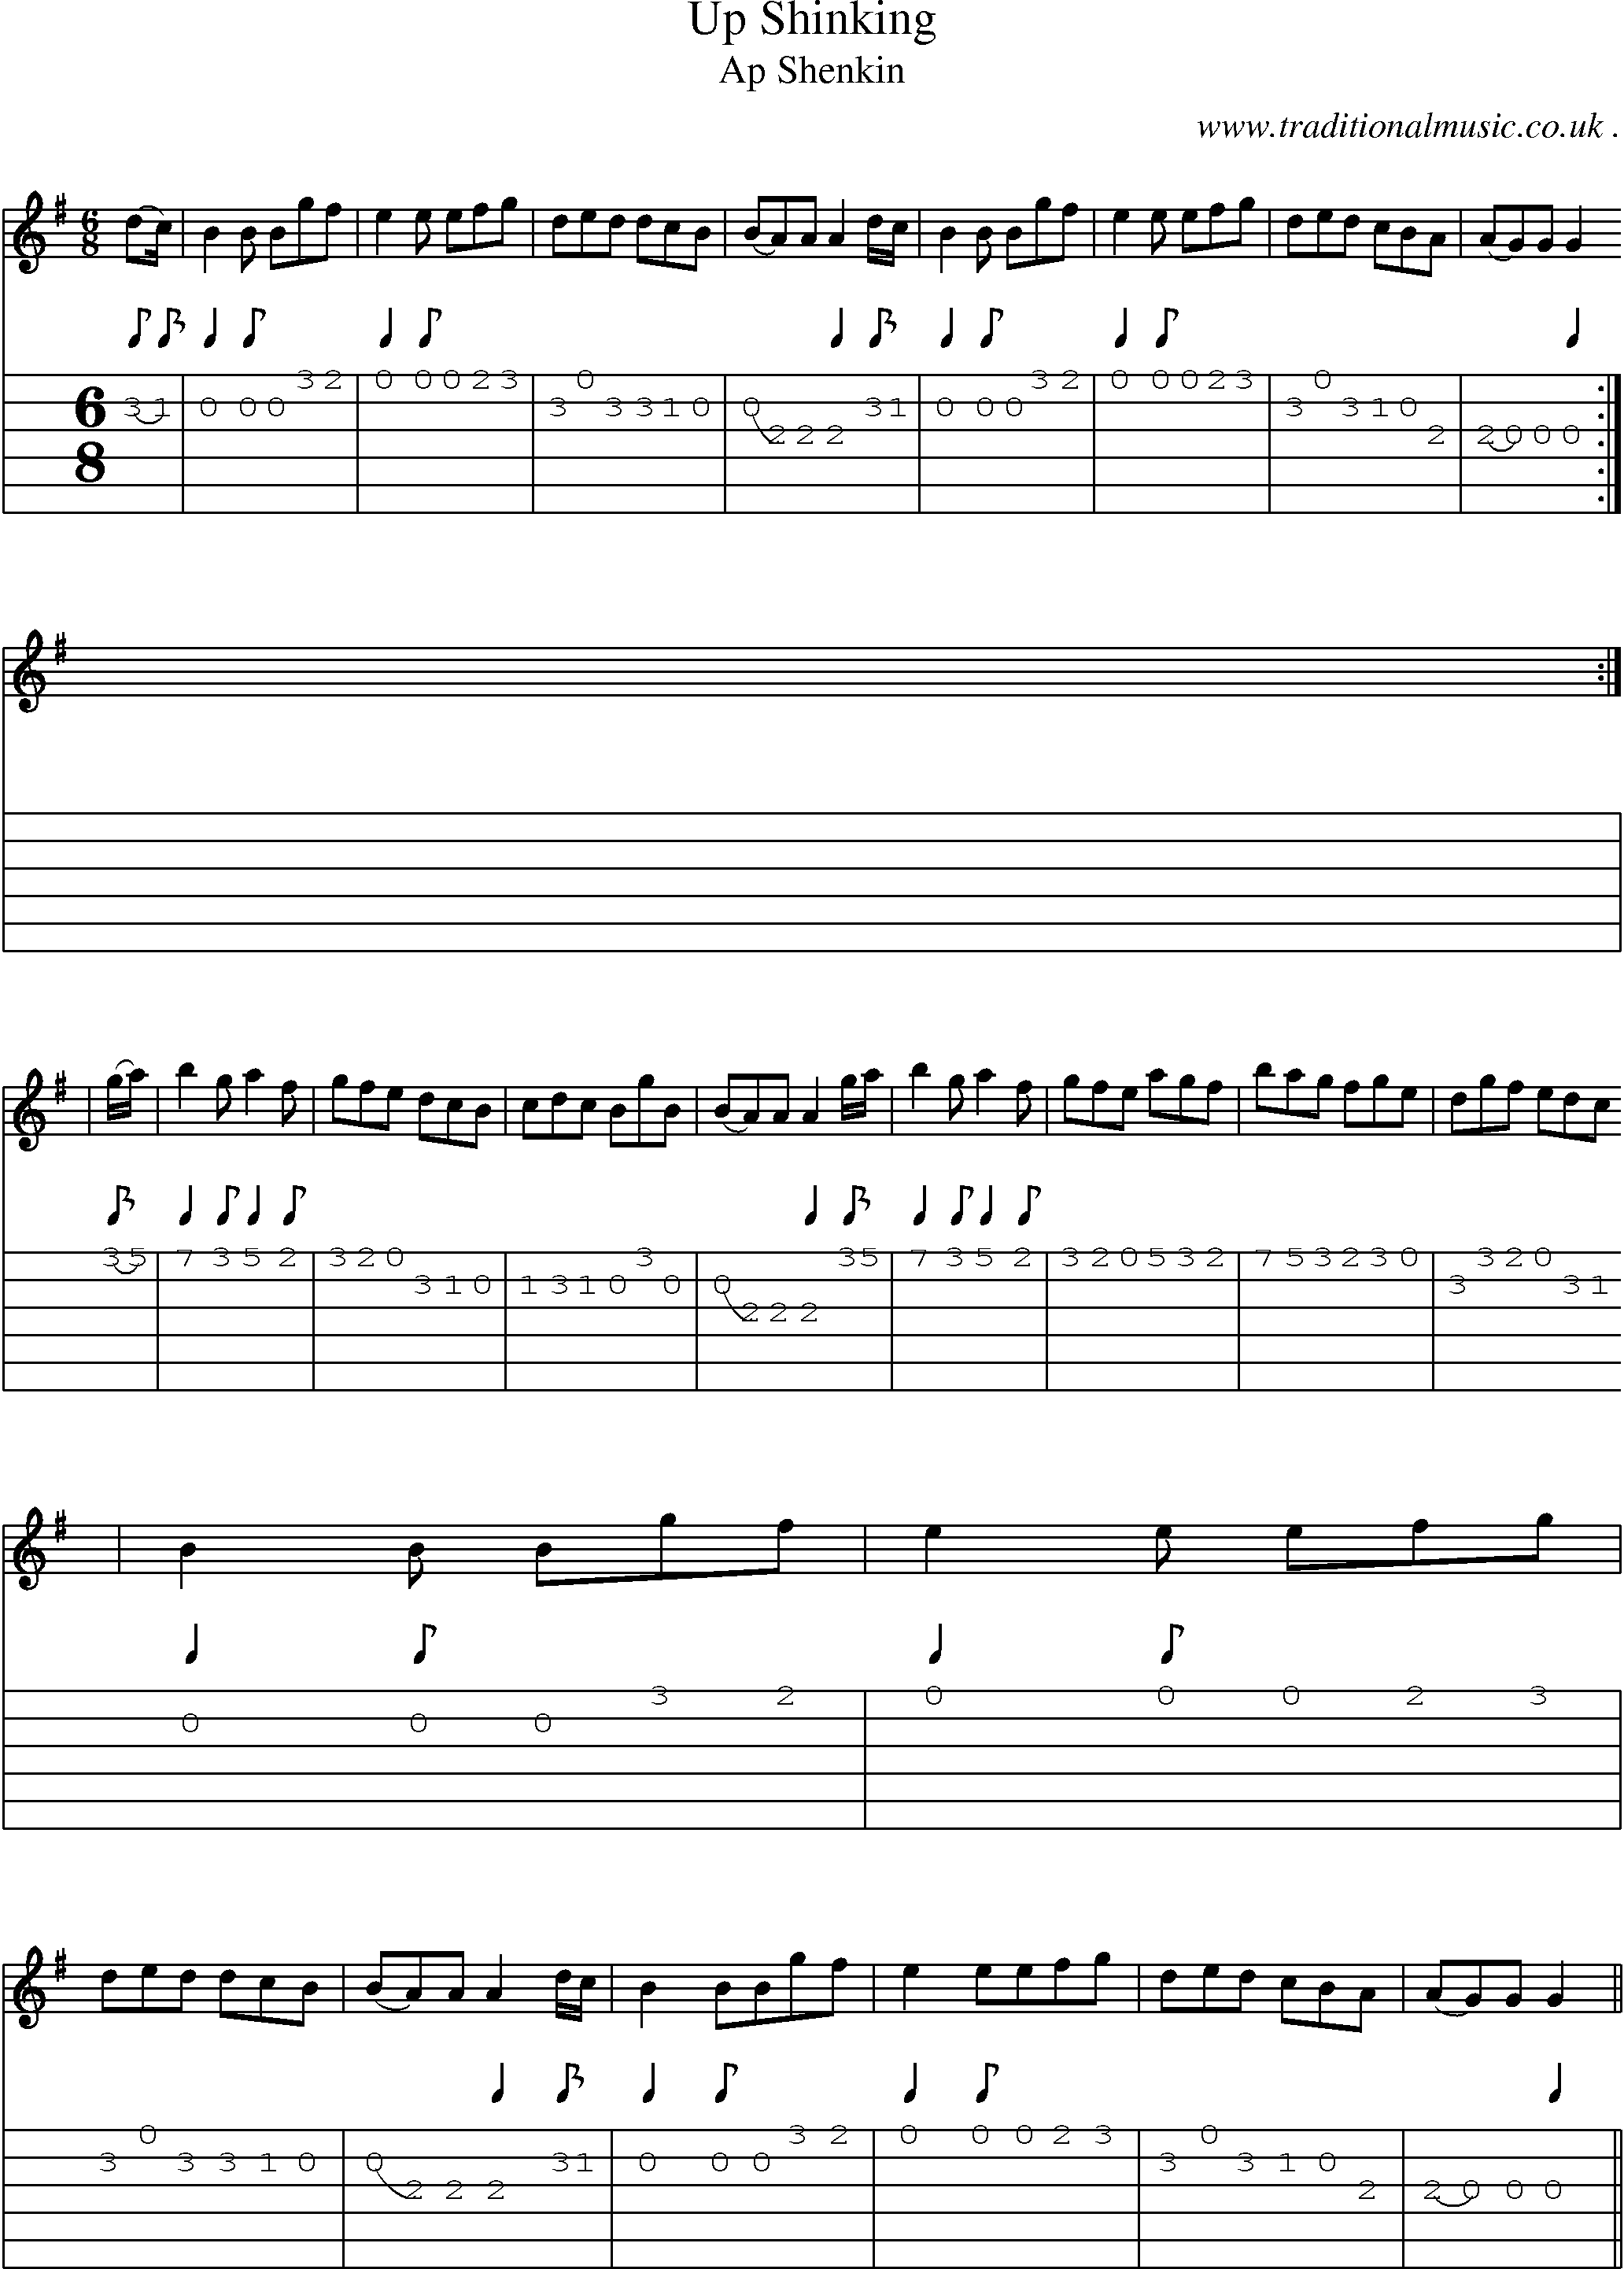 Sheet-Music and Guitar Tabs for Up Shinking